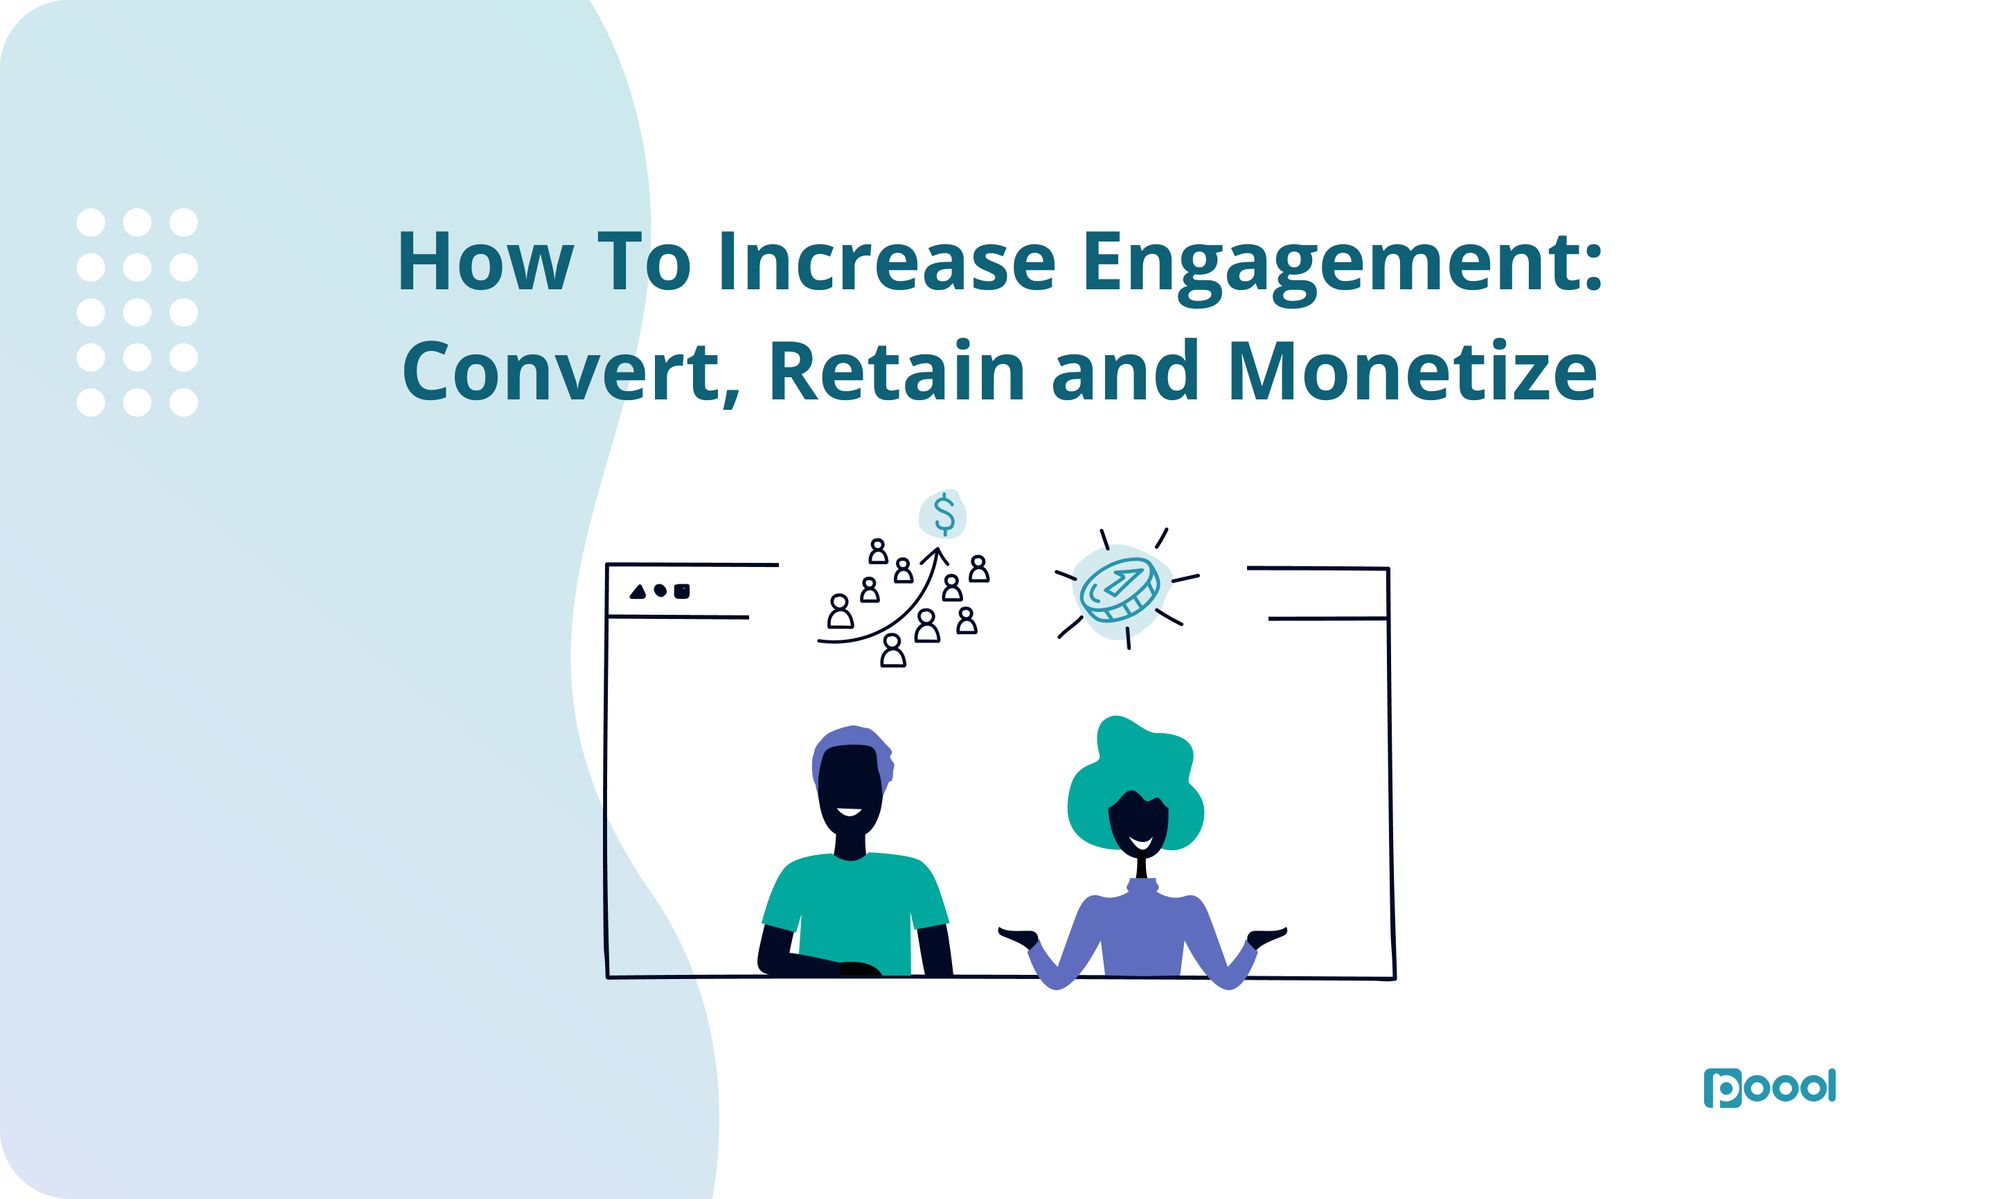 White Paper: How To Increase Engagement. Convert, Retain and Monetize.